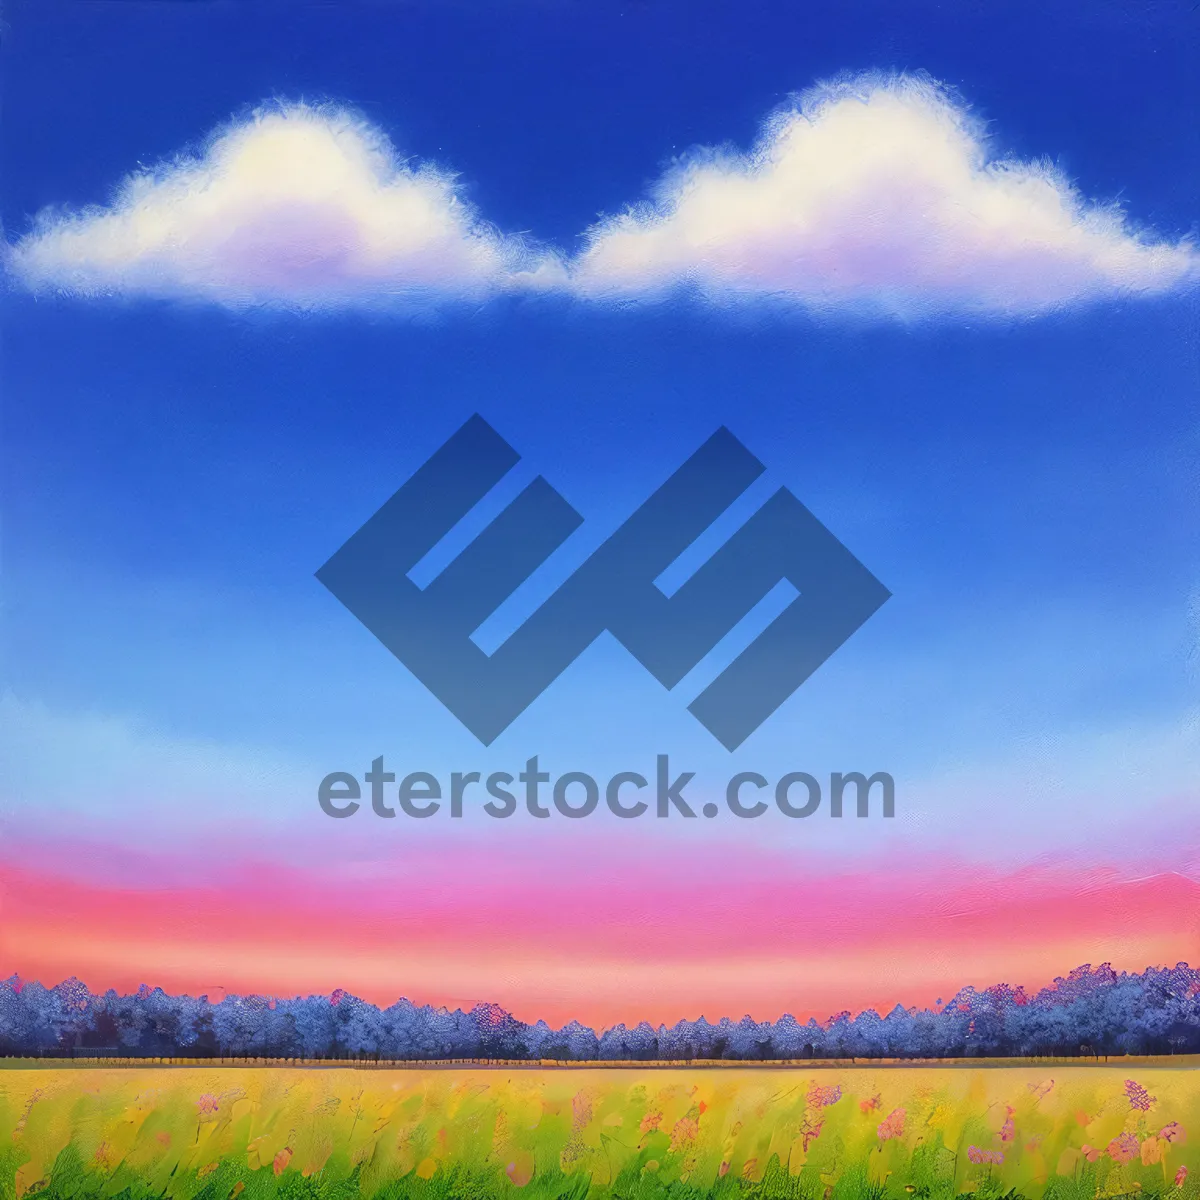 Picture of Serene countryside landscape under clear blue skies